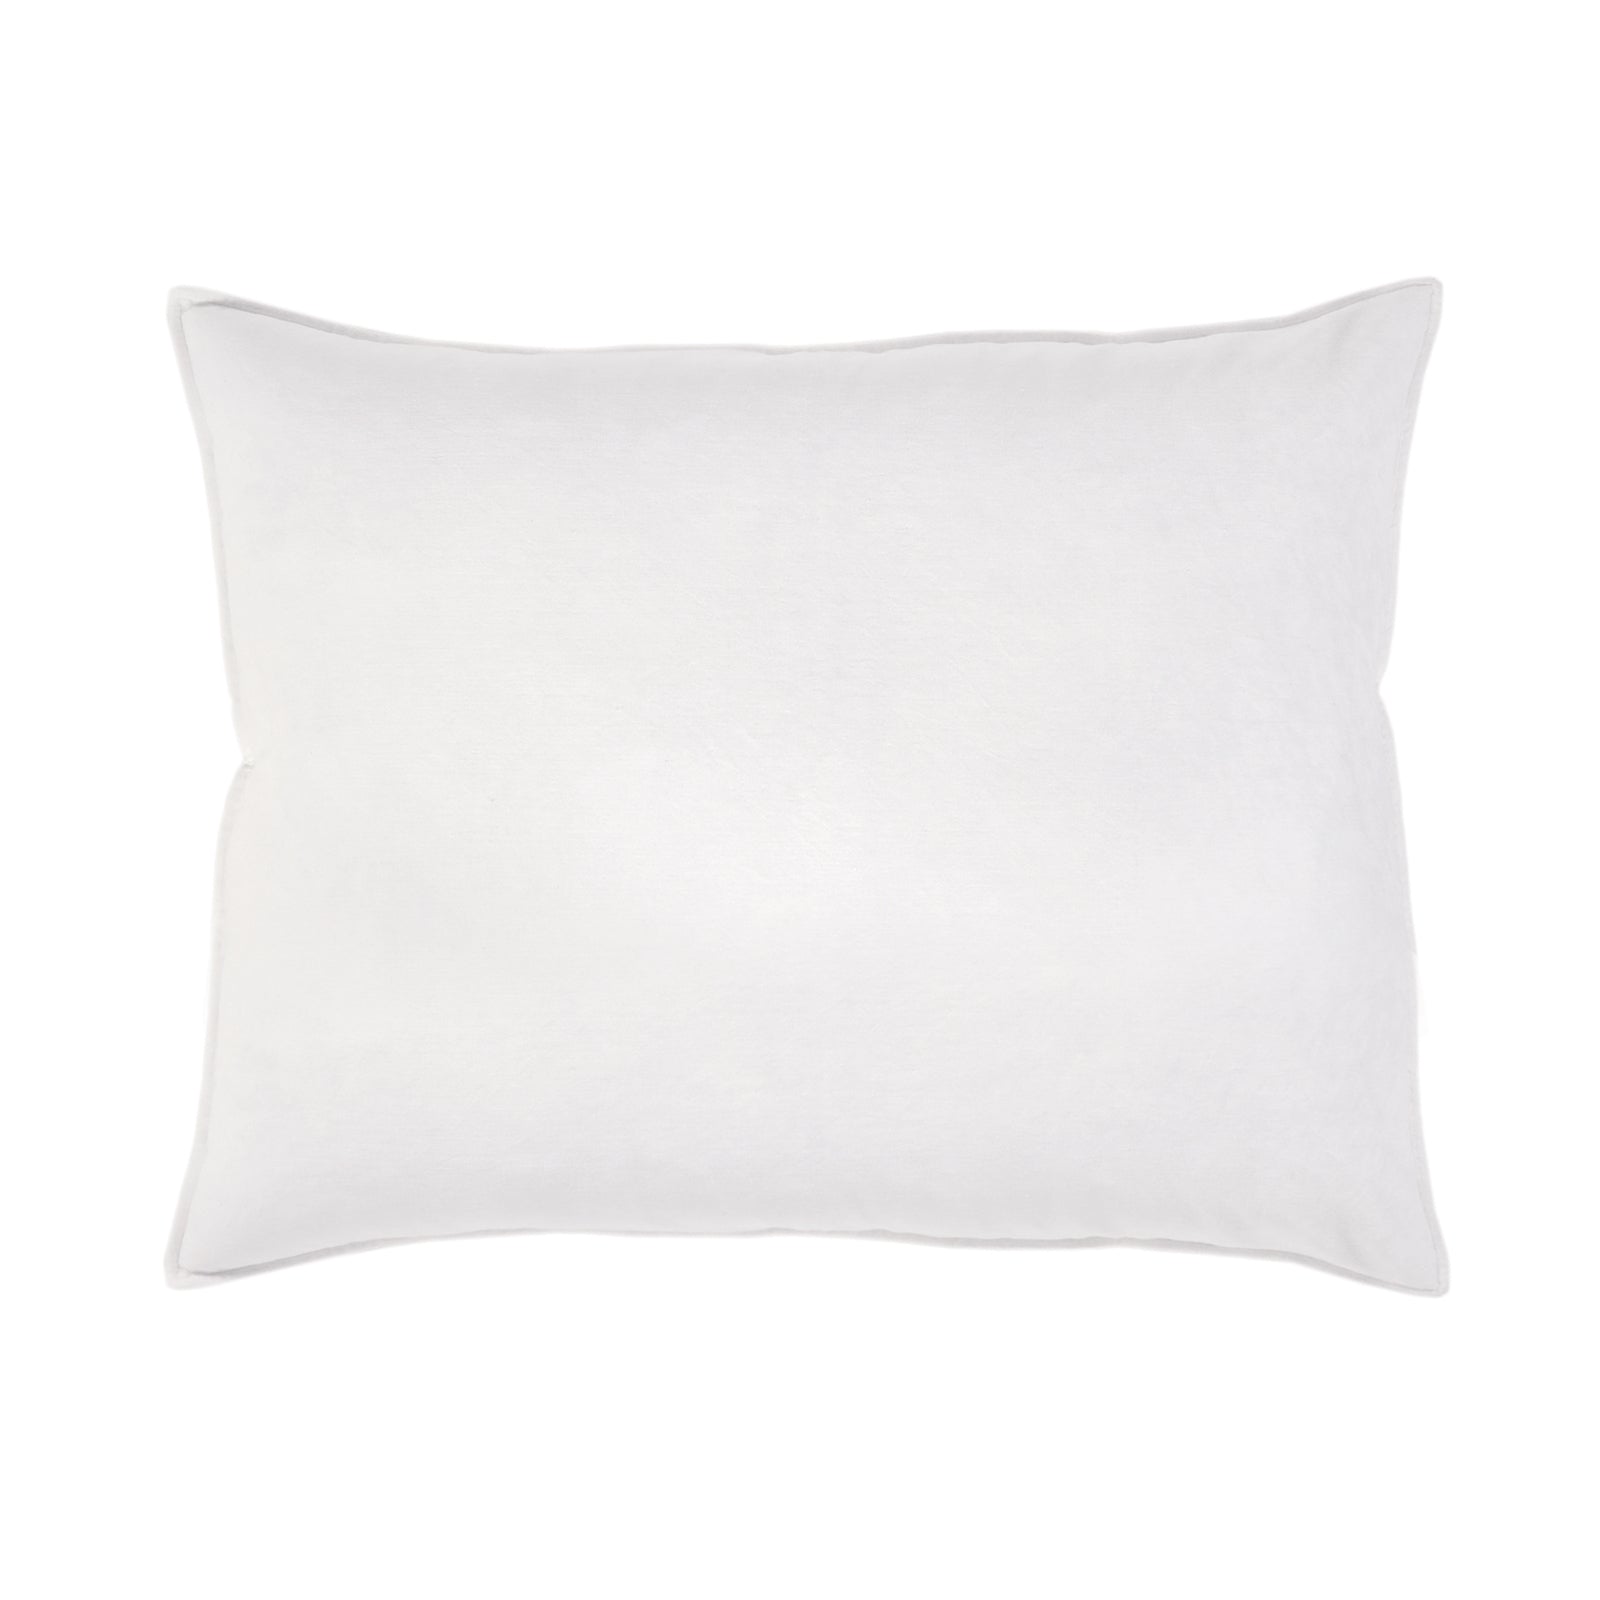 Bianca BIG PILLOW 28" X 36" WITH INSERT - White color - Pom pom At Home